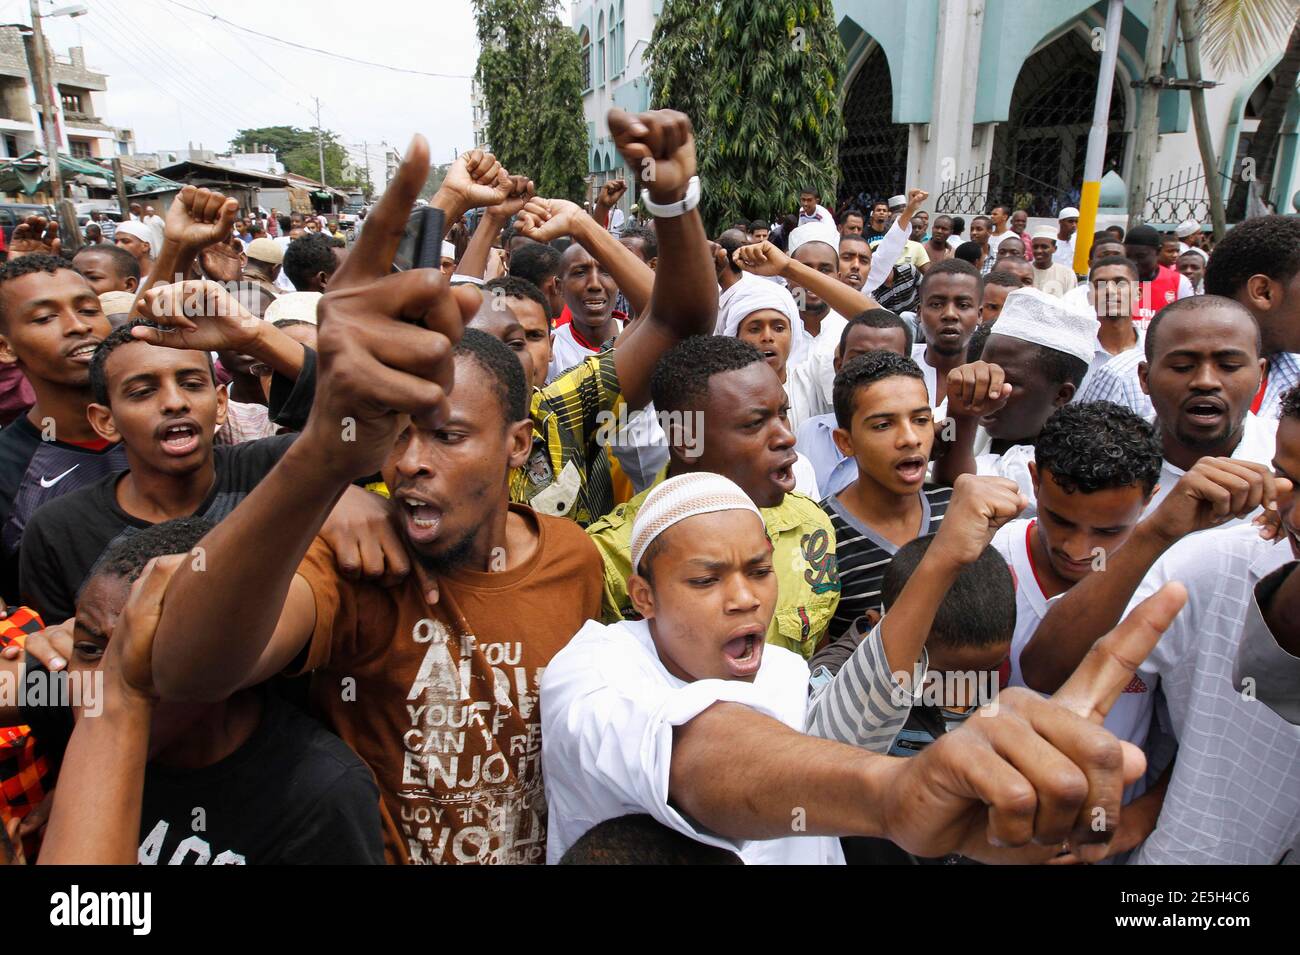 Muslim faithful gesture and chant slogans during a protest against the killing of Sheikh Aboud Rogo Mohammed, after Friday prayers at the Masjid Musa Mosque in the Kenyan coastal city of Mombasa, August 31, 2012. The killing of Muslim cleric Aboud Rogo Mohammed on August 27, 2012, accused by the United States of helping al Qaeda-linked Islamist militants in Somalia, triggered riots and violence in which five people, including three police officers, were killed. REUTERS/Thomas Mukoya (KENYA - Tags: SOCIETY RELIGION CIVIL UNREST CRIME LAW) Stock Photo